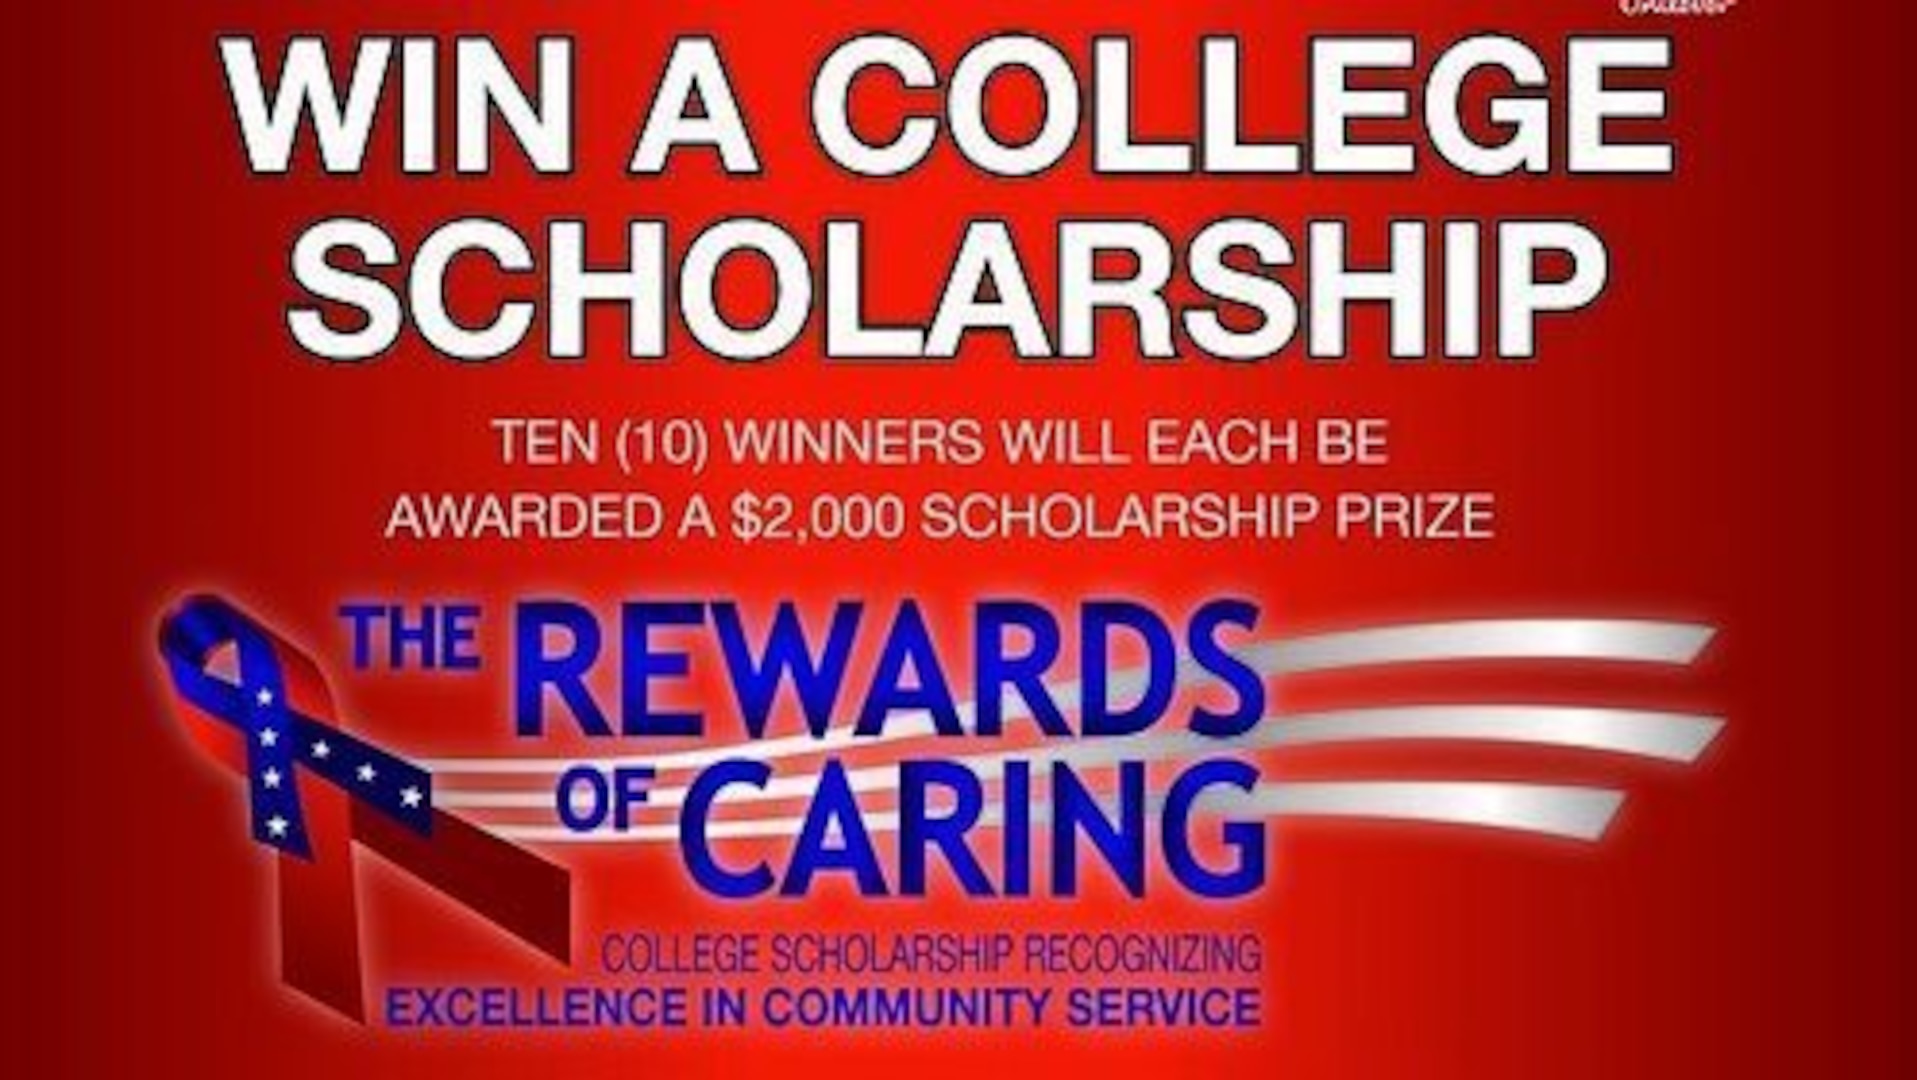 Military students who excel at serving their communities can earn cash for college by telling their stories in an essay contest.